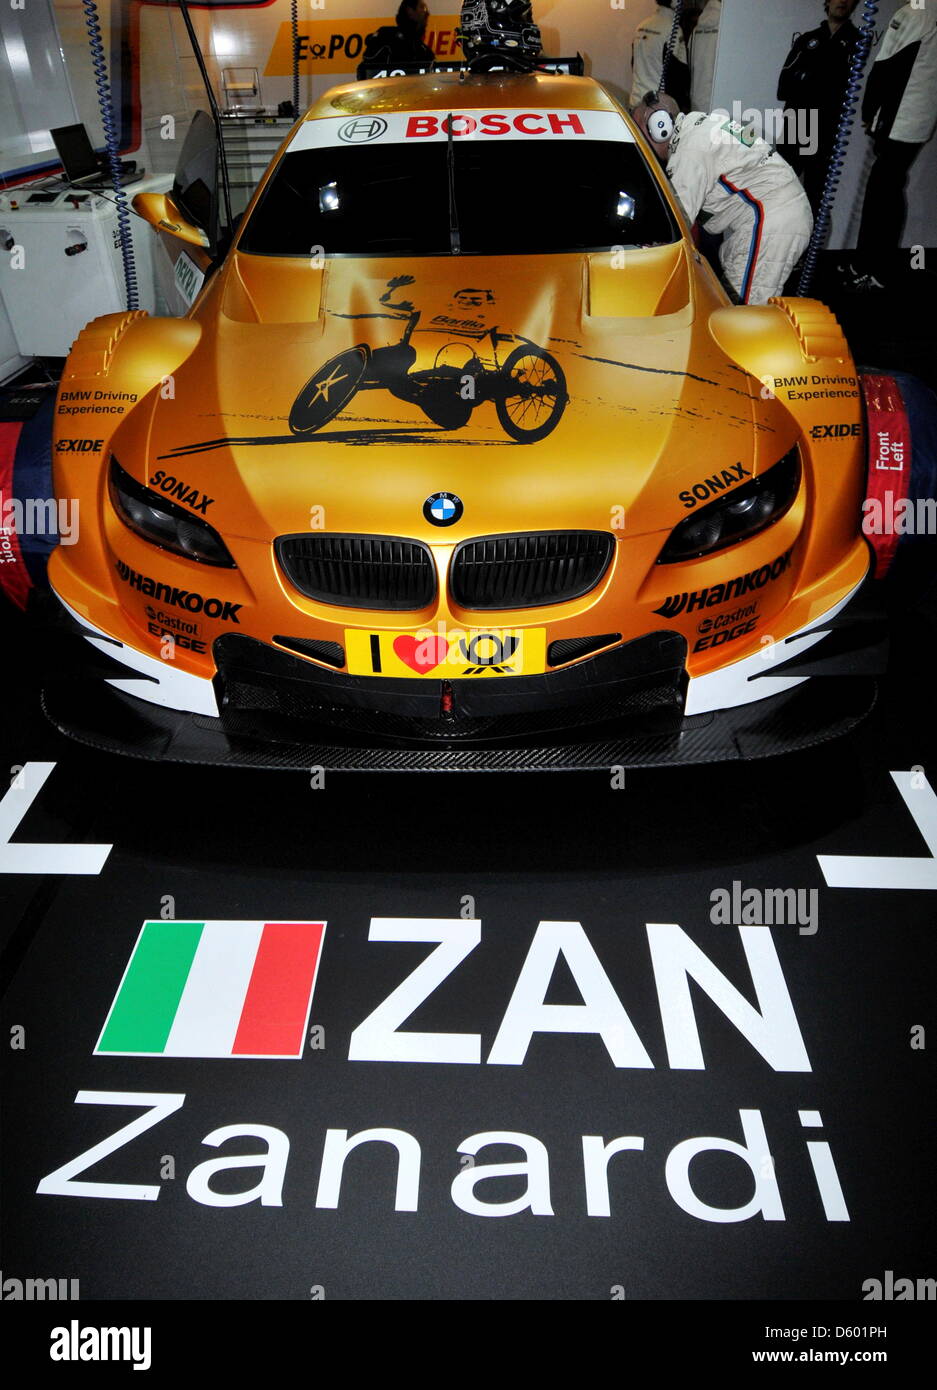 The refitted DTM race car of Italian racecar driver Alessandro Zanardi sits in a pit at the Nuerburgring, Germany, 08 November 2012. Zanardi lost both of his legs during an accident in 2001, won two gold medals at the Paraolympics in London, and is testing with BMW on the Nuerburgring now. Photo: MAXIMILIAN HAUPT Stock Photo